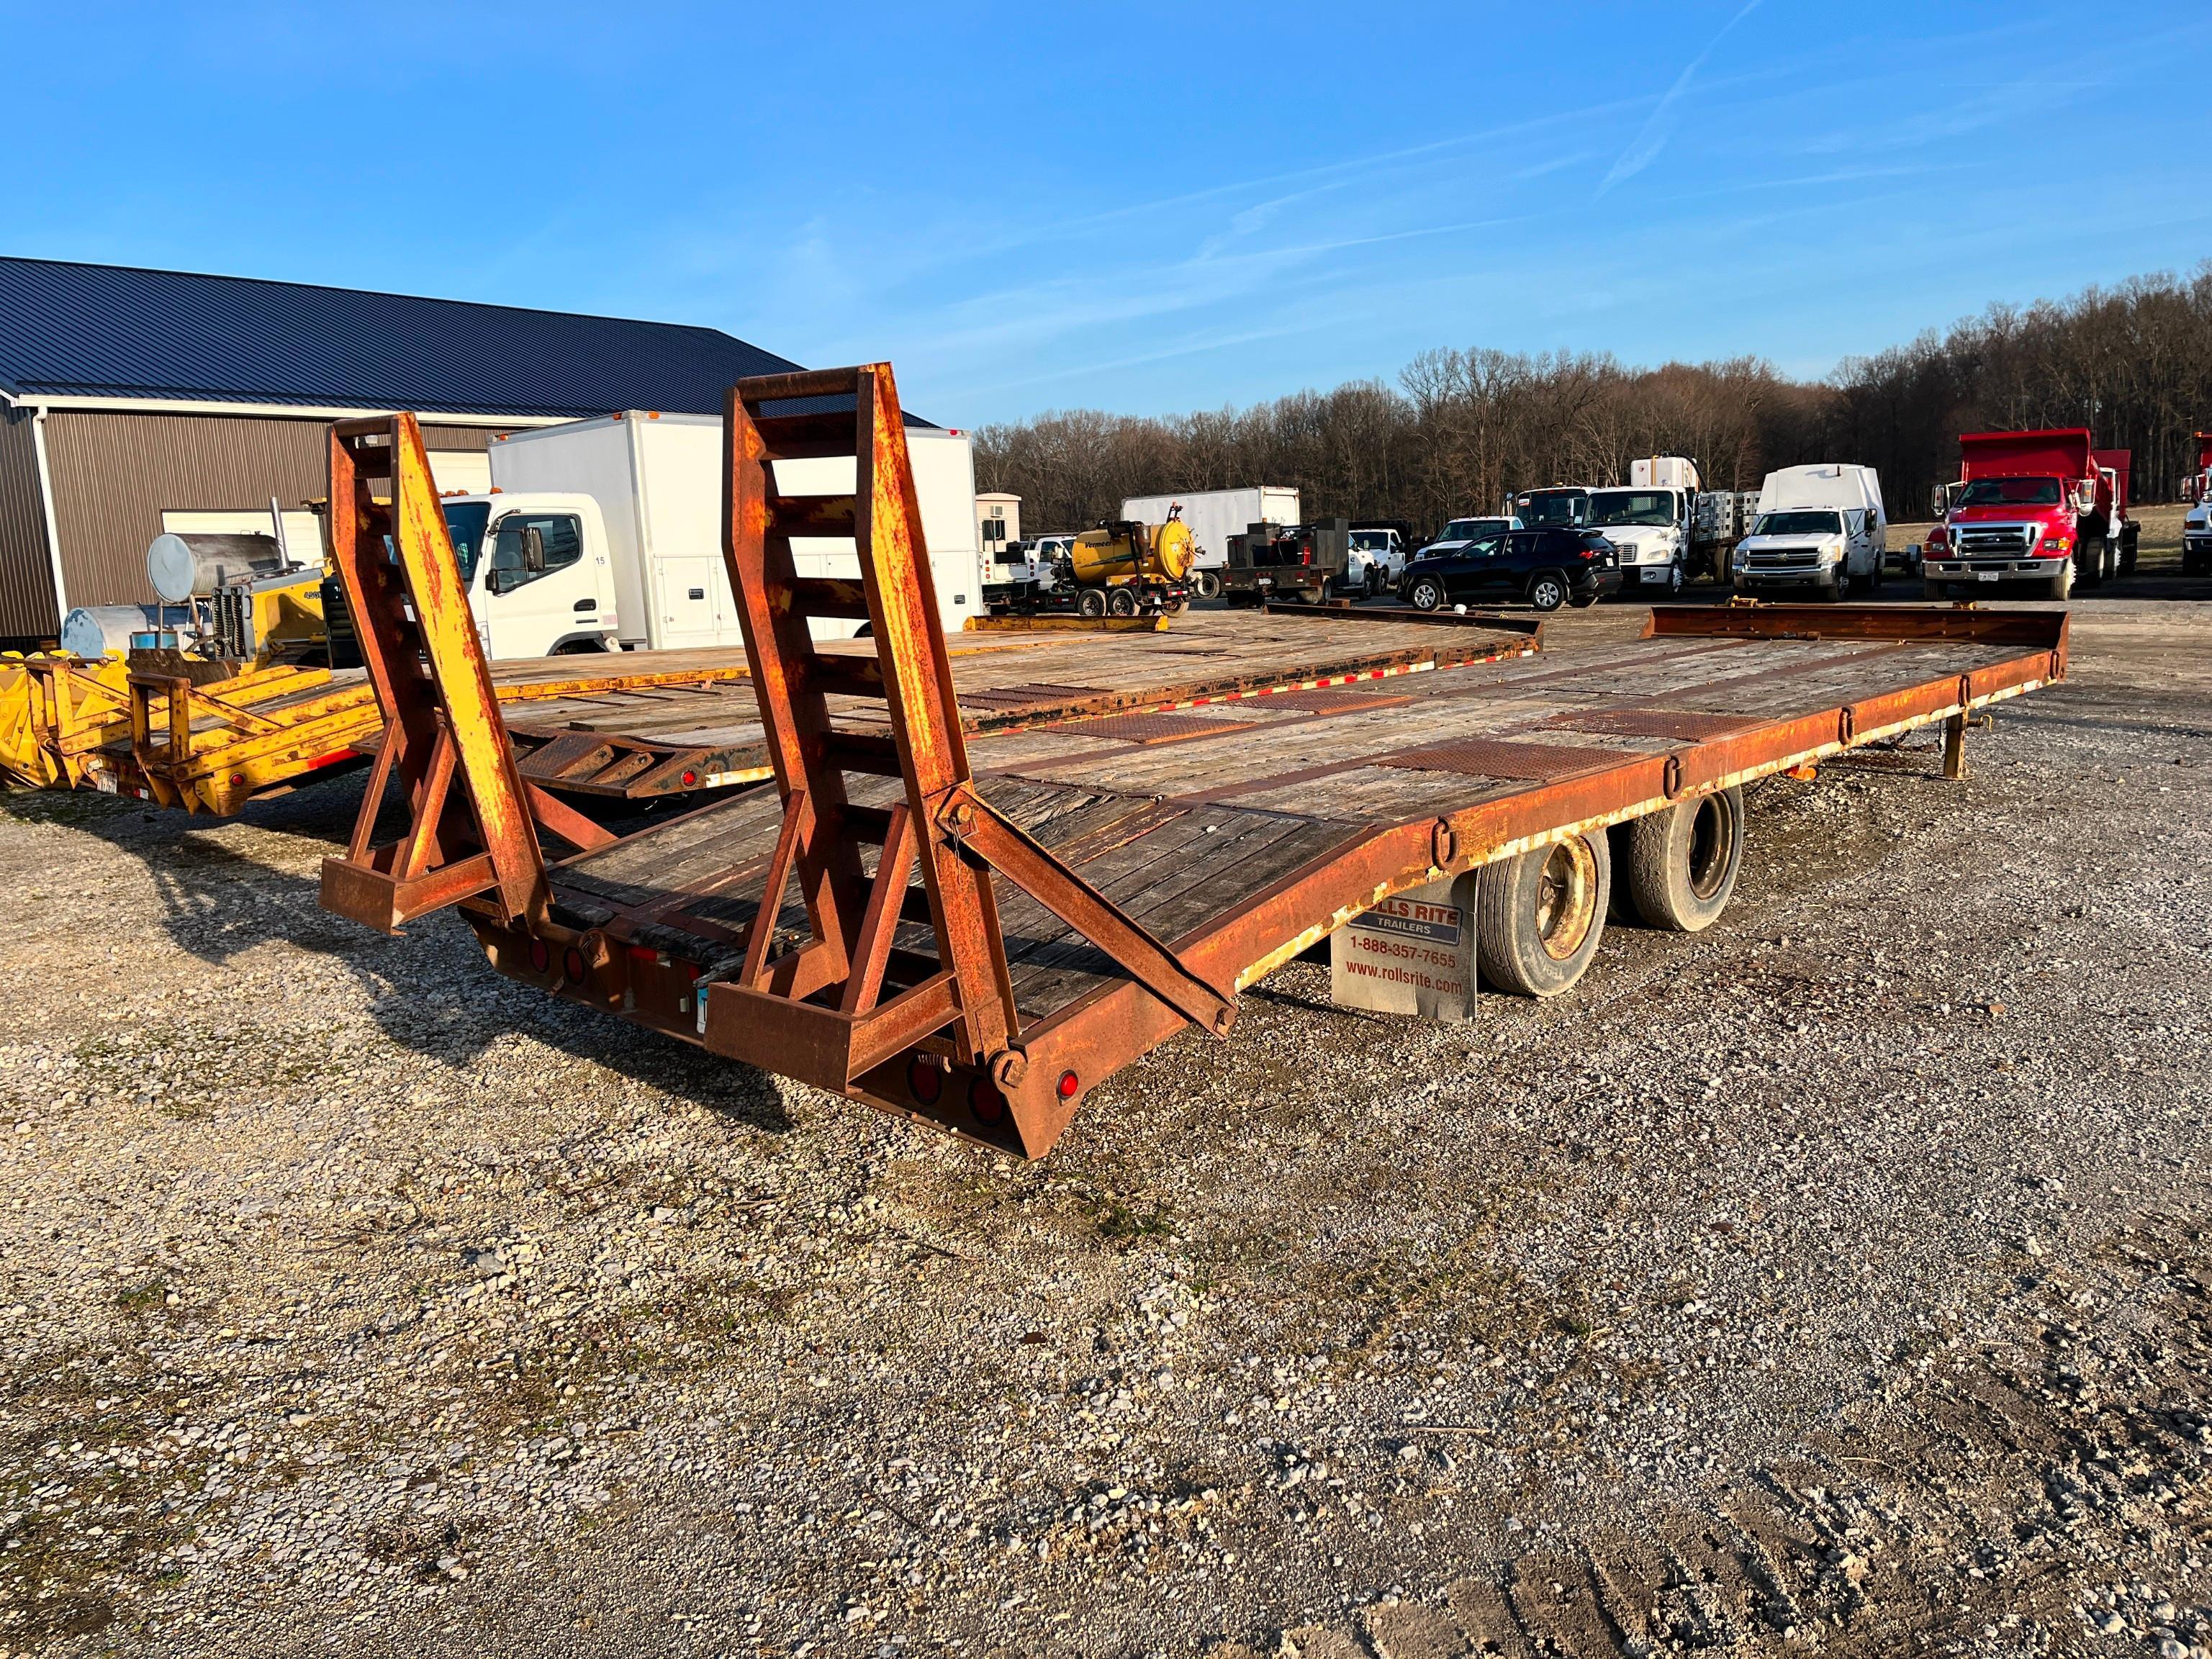 2012 ROLL RITE 48KP29HD TAGALONG TRAILER VN:1R9PD2923CM356020......equipped with 20 ton capacity, 10